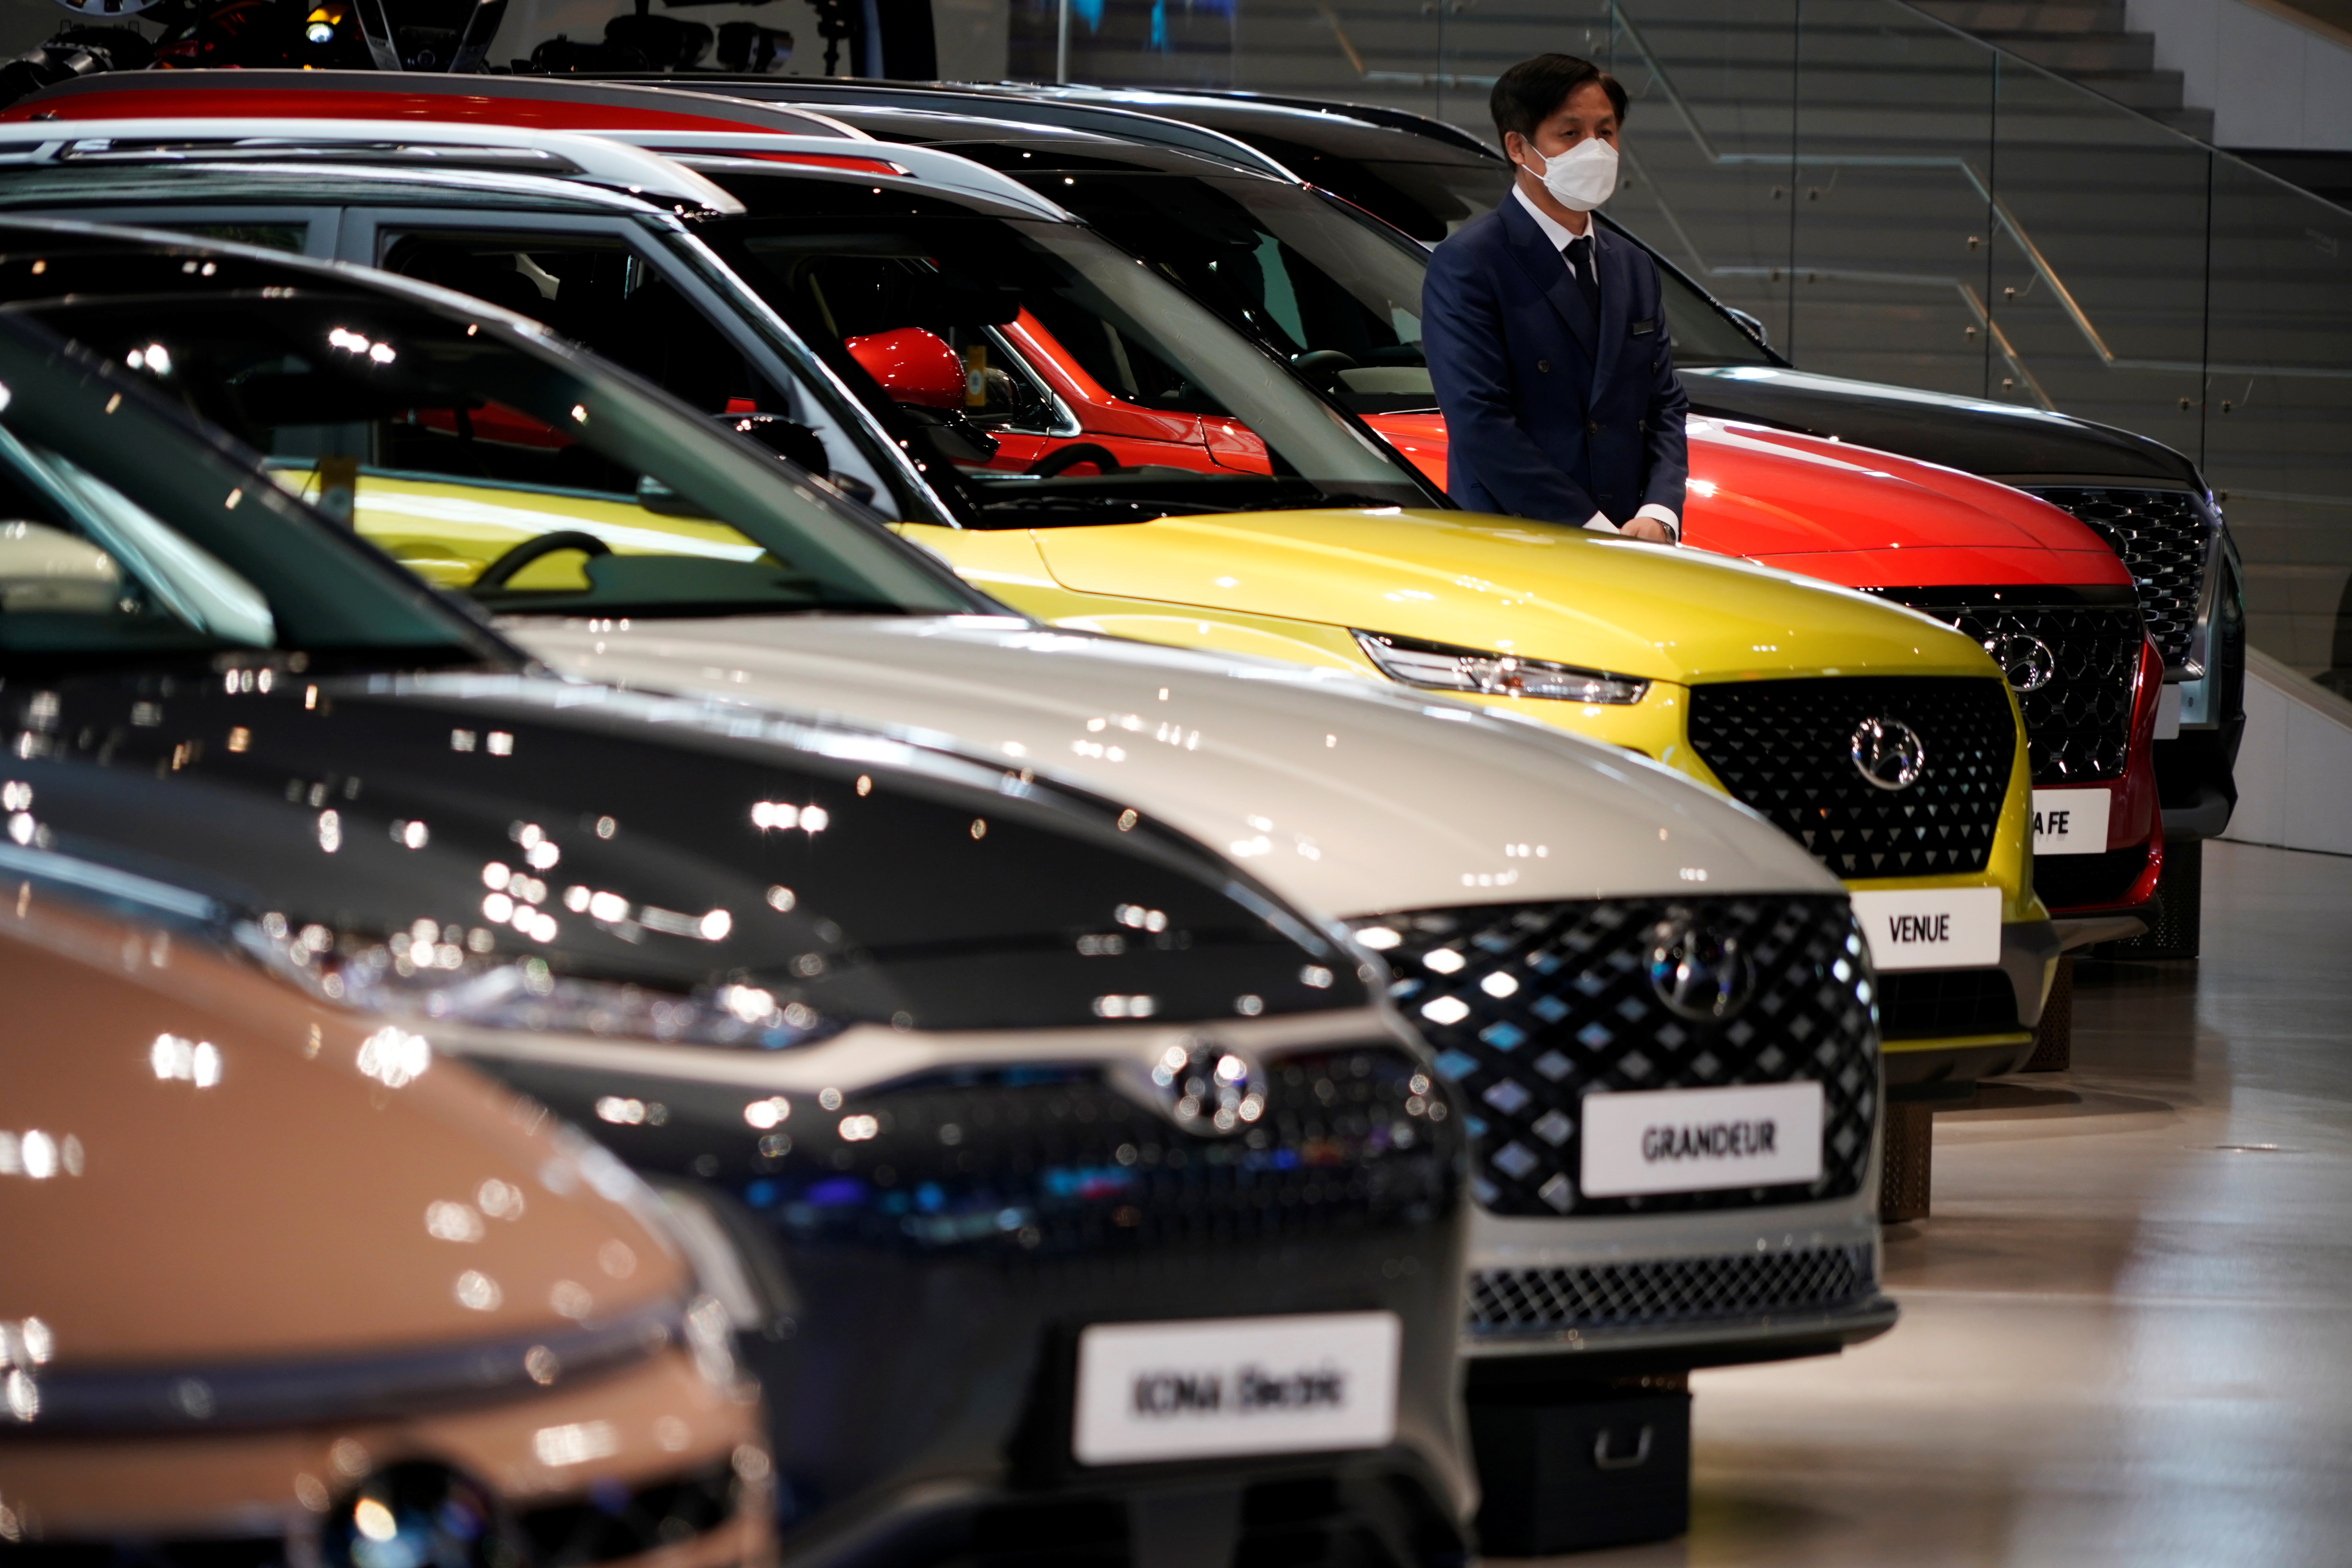 FILE PHOTO: An employee wearing a mask to prevent contracting the coronavirus disease (COVID-19) waits for custormers next to a Hyundai Motor's vehicle at Hyundai Motor Studio in Goyang